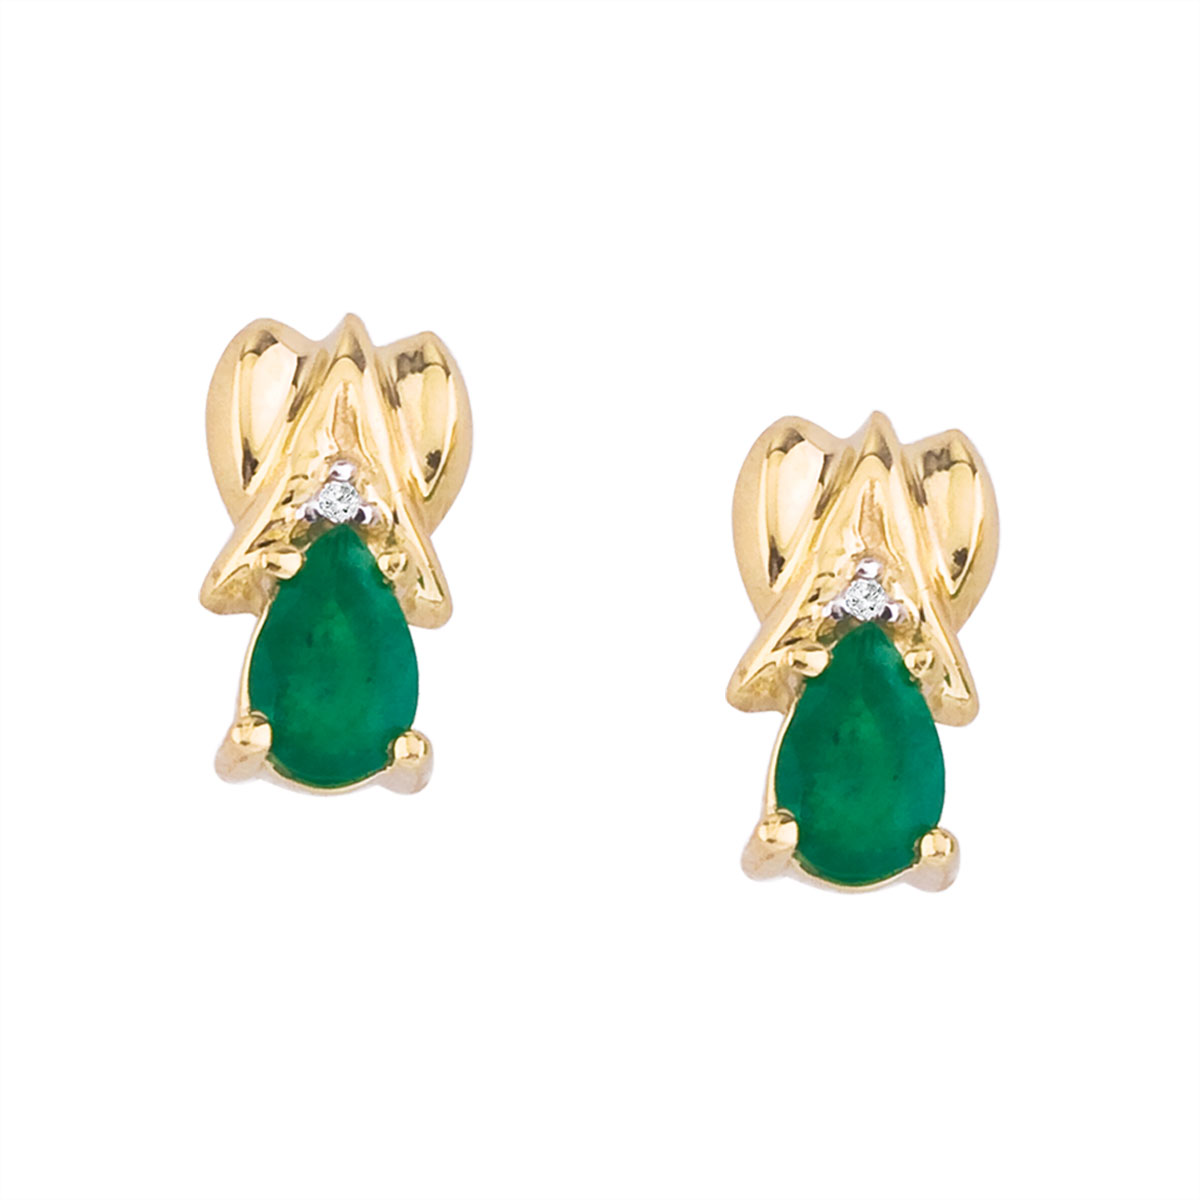 JCX2290: 14k yellow gold stud earrings with 6x4 mm pear emeralds and bright diamond accents.